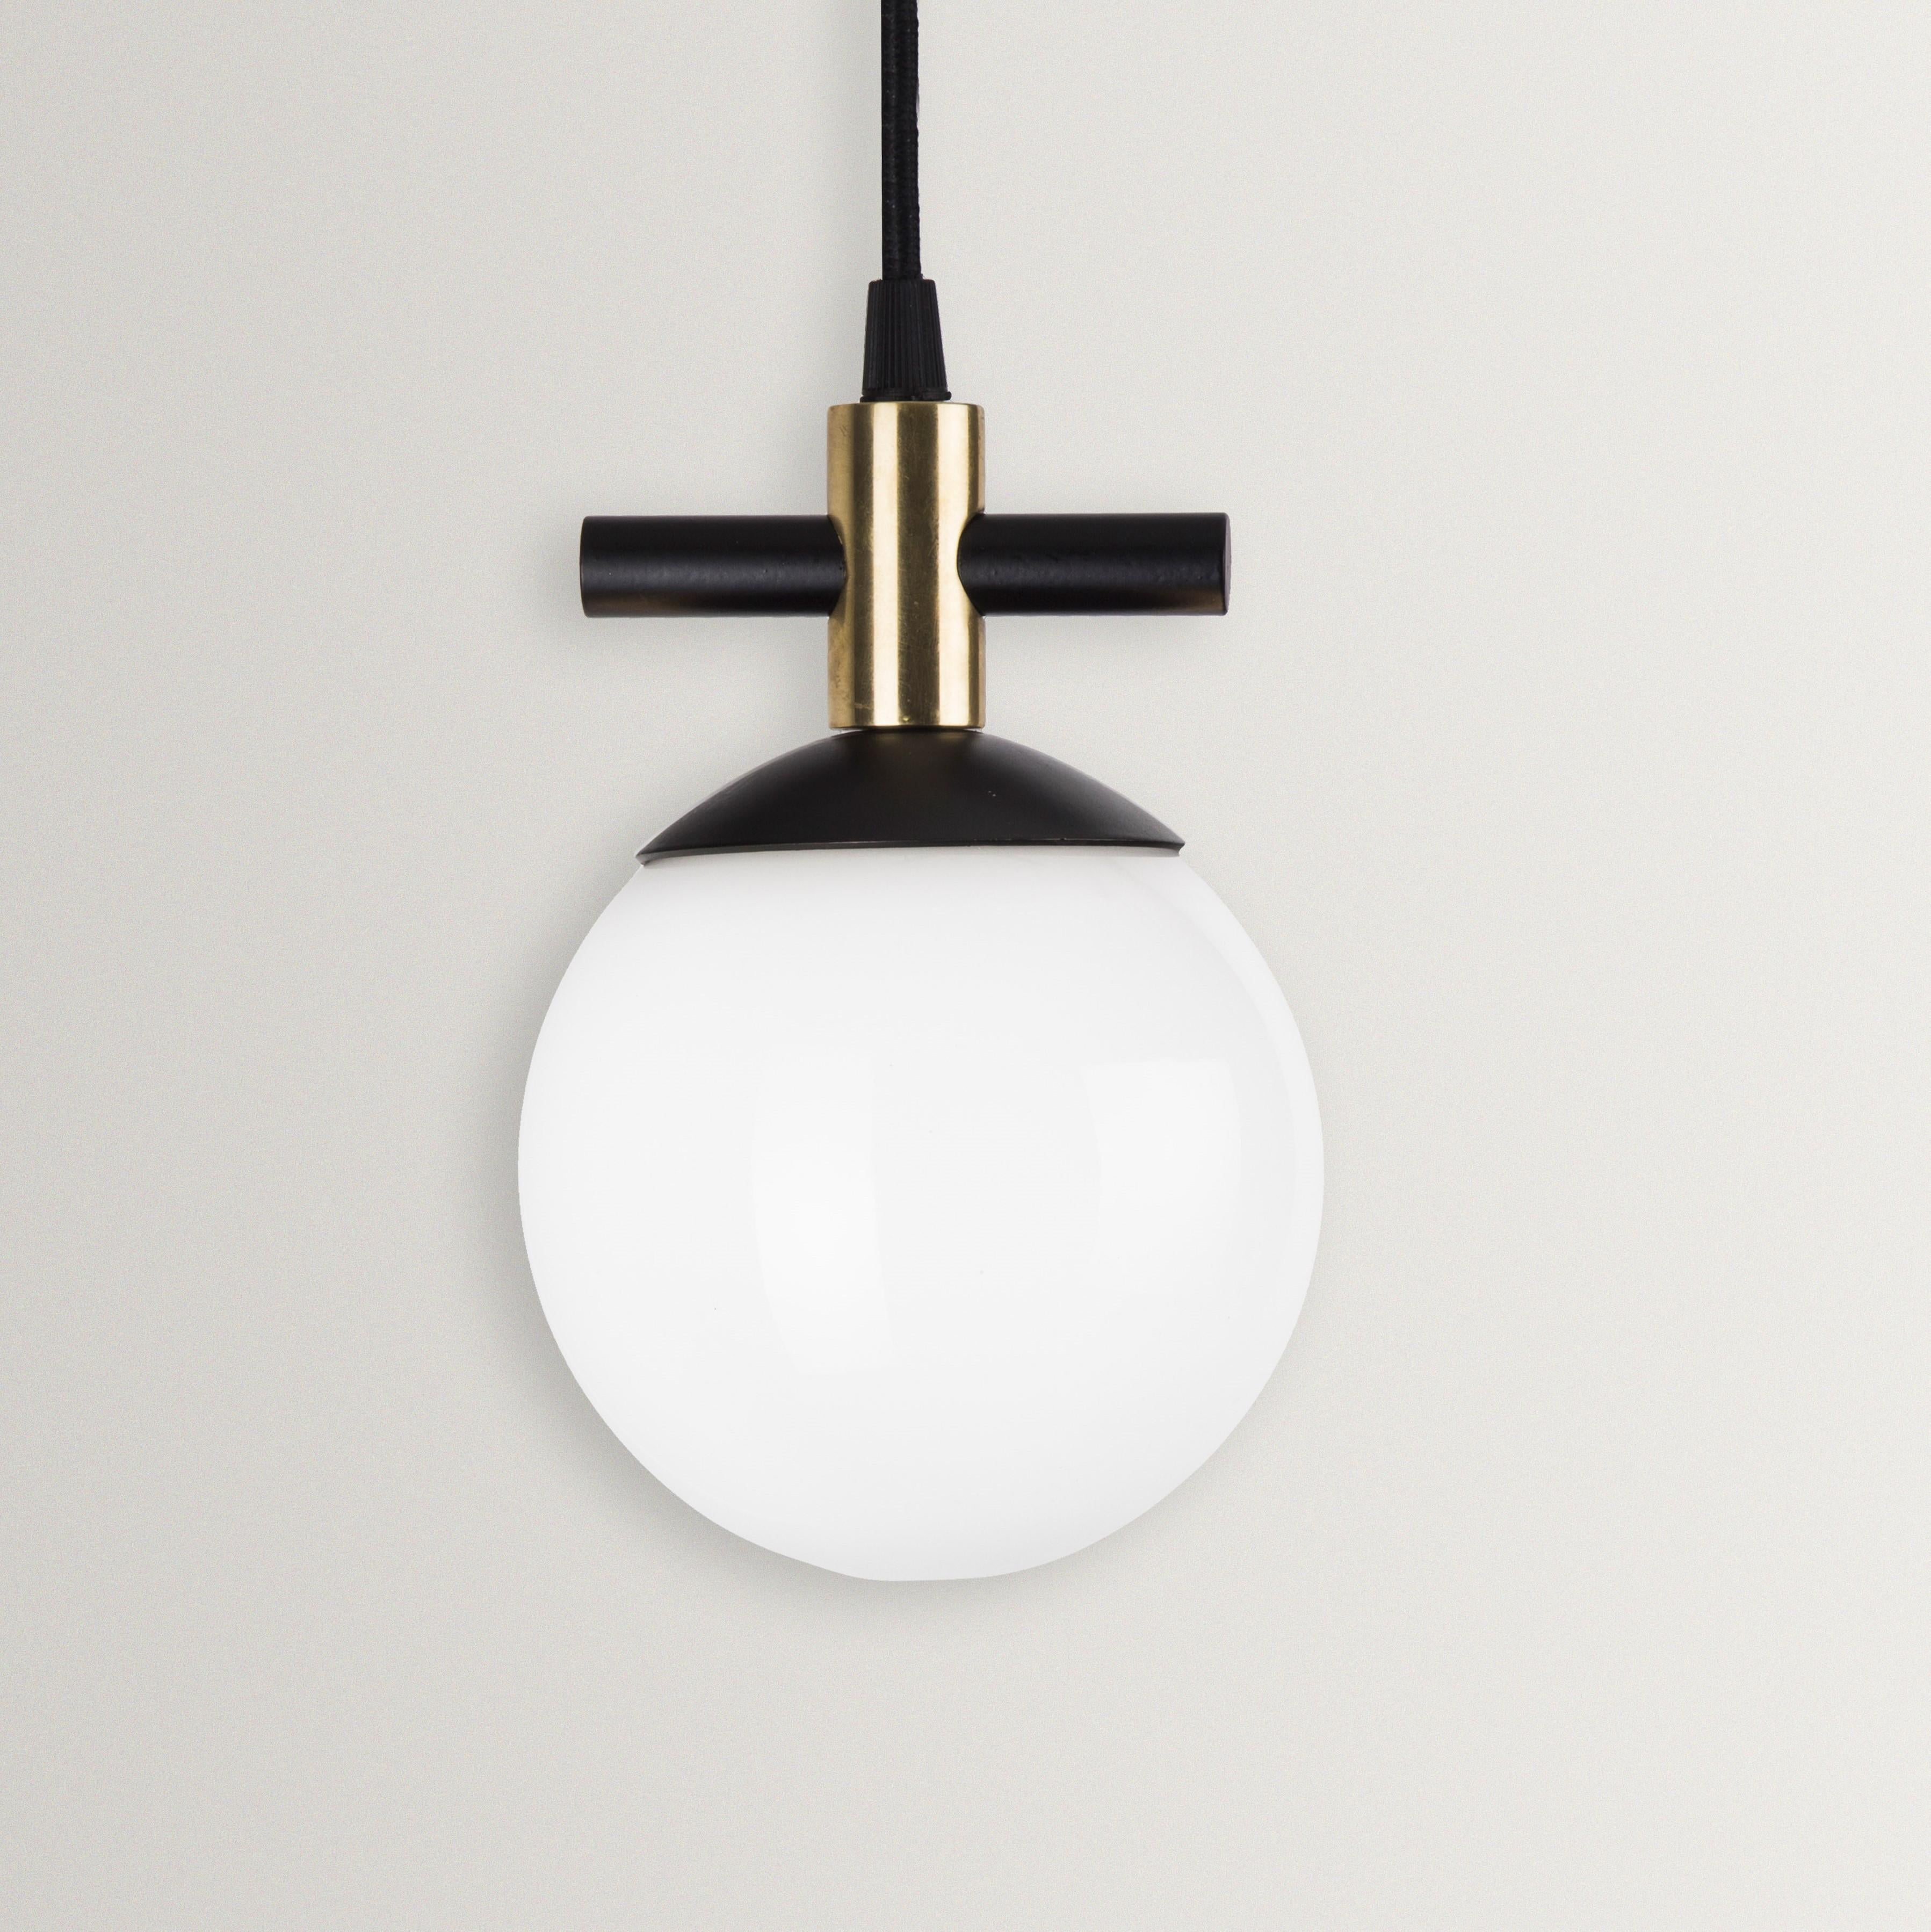 Unique Esferra pendant by Hatsu
Dimensions: W 14 x H 19 cm 
Materials: Opal glass with powdercoated aluminium

Hatsu is a design studio based in Mumbai that creates modern lighting that are unique and immediately recognisable. We started with an